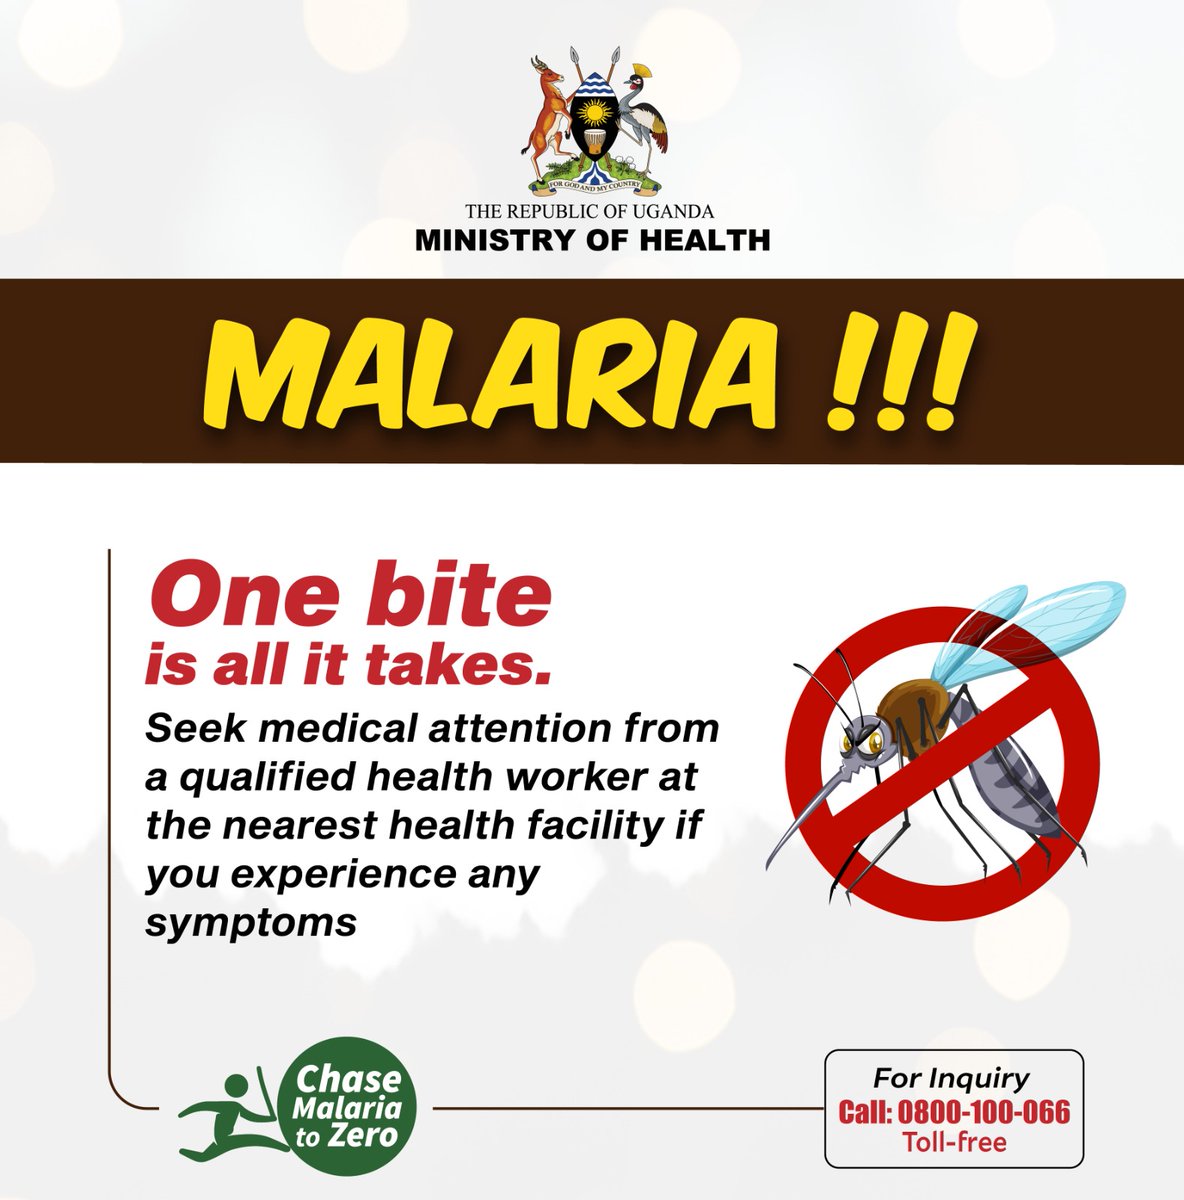 If you experience signs and symptoms of #Malaria, seek immediate medical attention from a qualified health worker at the nearest health facility. 
Do NOT self-medicate! #ChaseMalariaUG #WorldMalariaDayUG